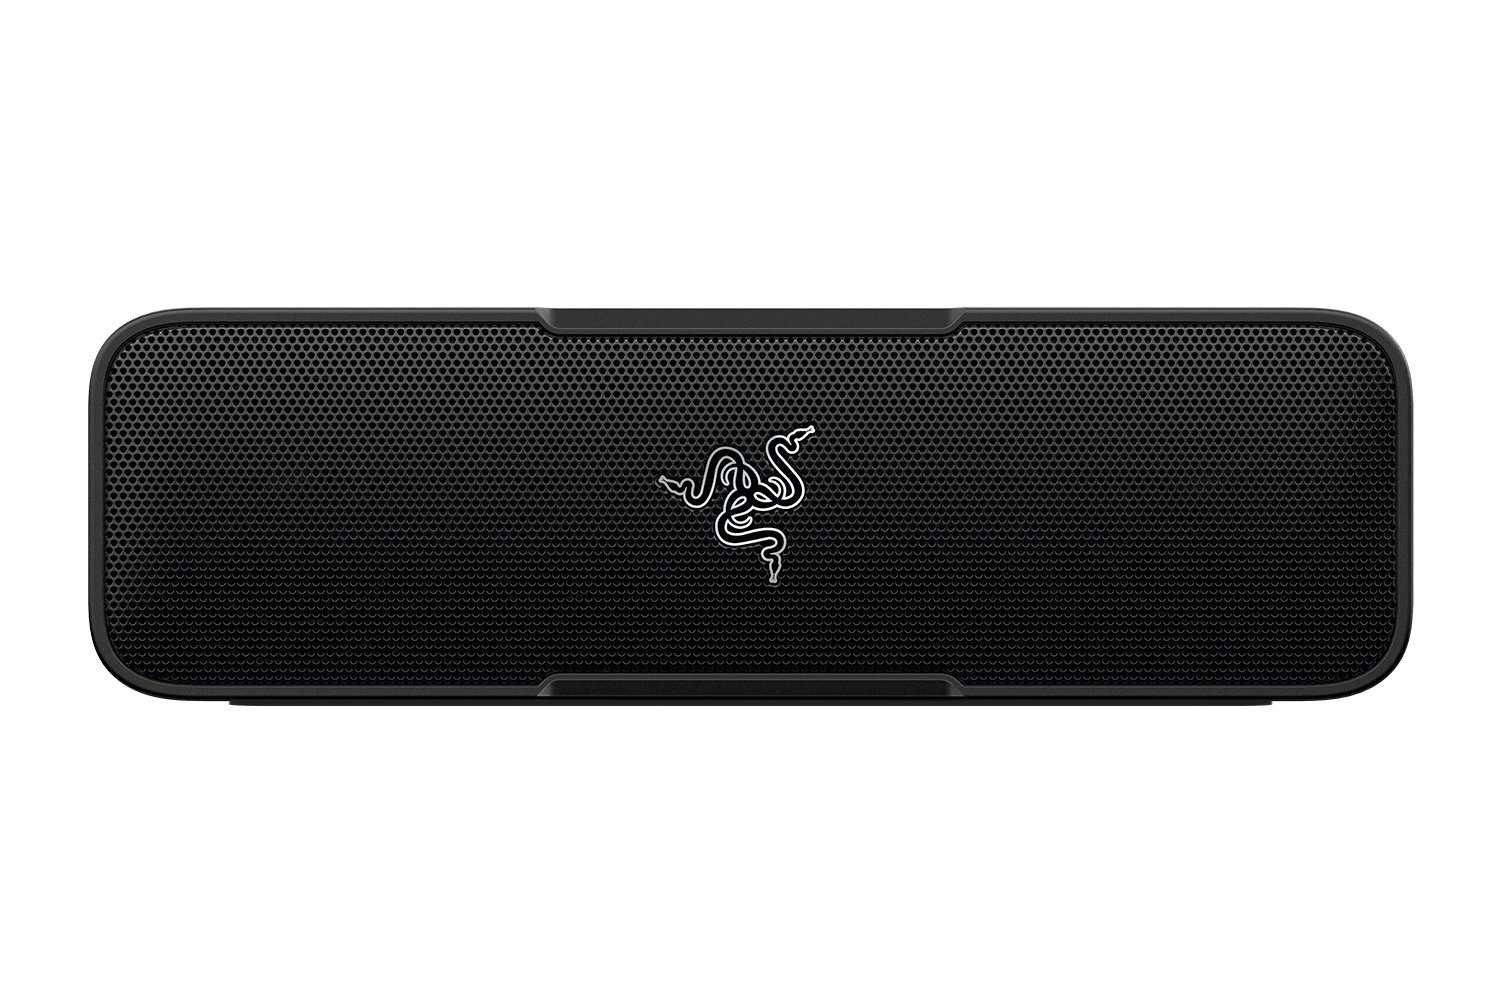 Razer Leviathan Mini: 10 Hour Battery Life - Bluetooth aptX Technology - Microphone with Clear Voice Capture Technology - Combo Play for Wireless S...